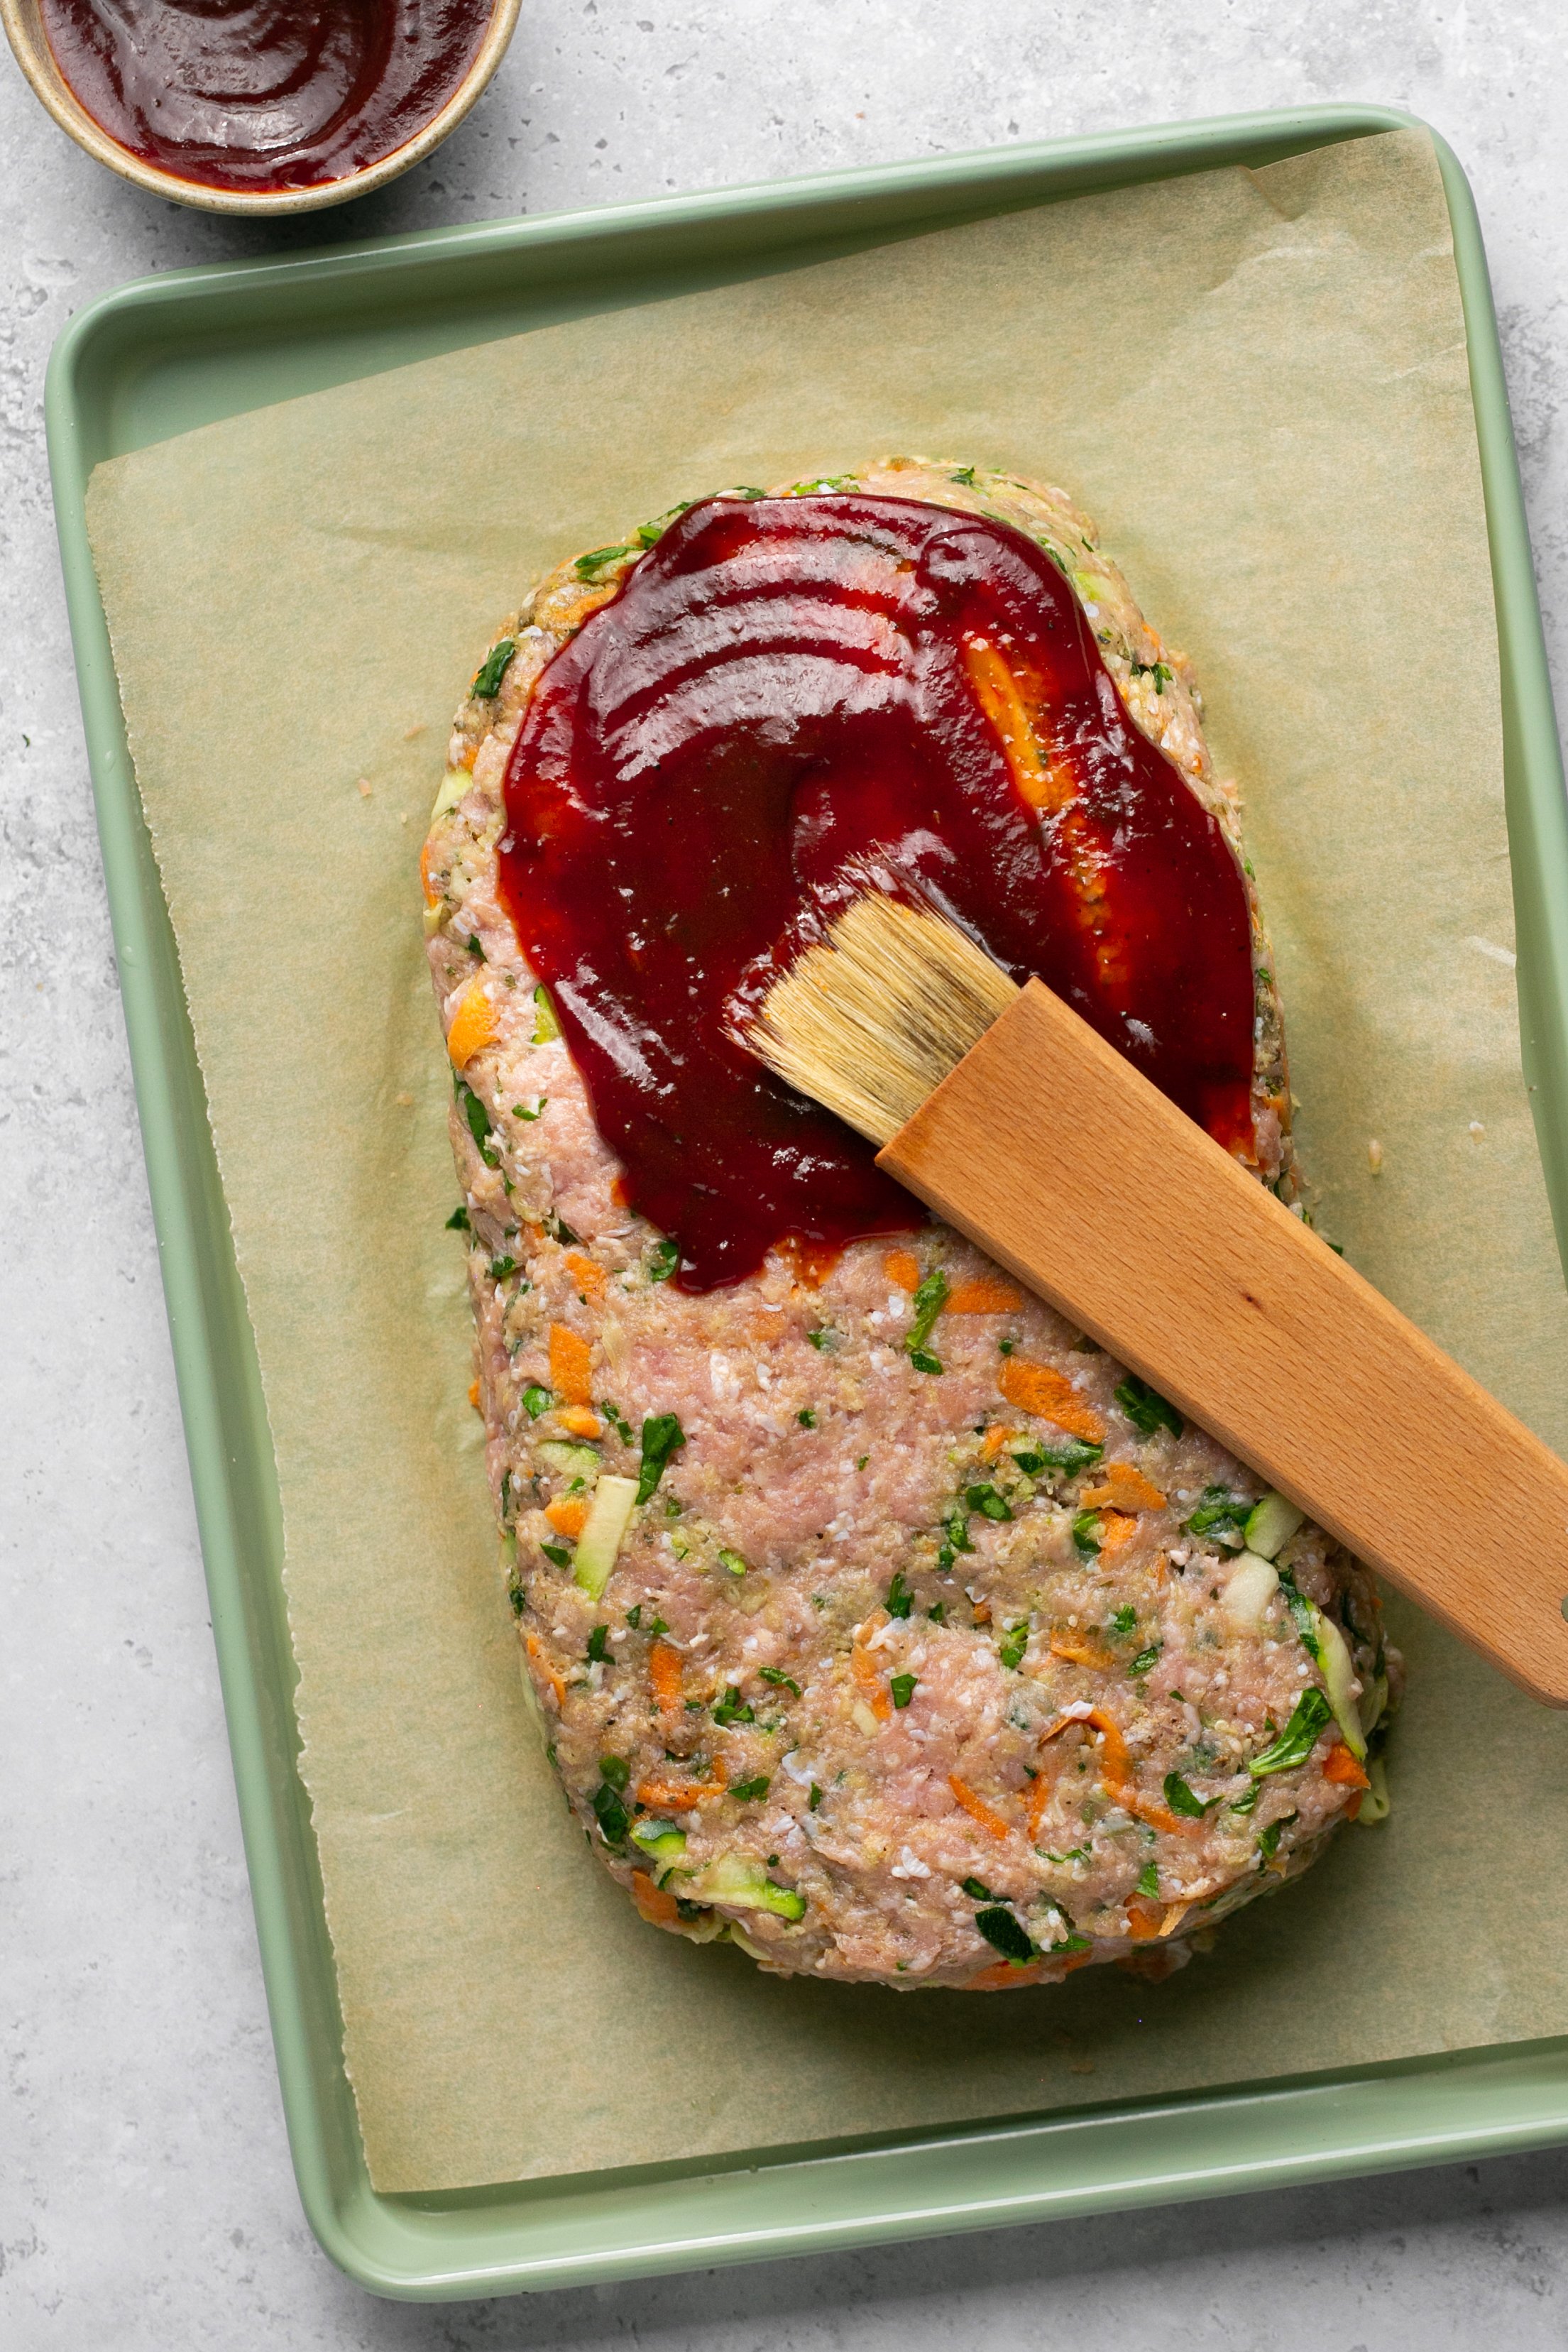 Raw turkey meatloaf mixture shaped into a rectangular loaf sitting on a parchment lined baking sheet on a white counter. Raw meatloaf is being covered with barbecue sauce using a wooden basting brush. A small white bowl of barbecue sauce is set to the side; slightly out of frame.